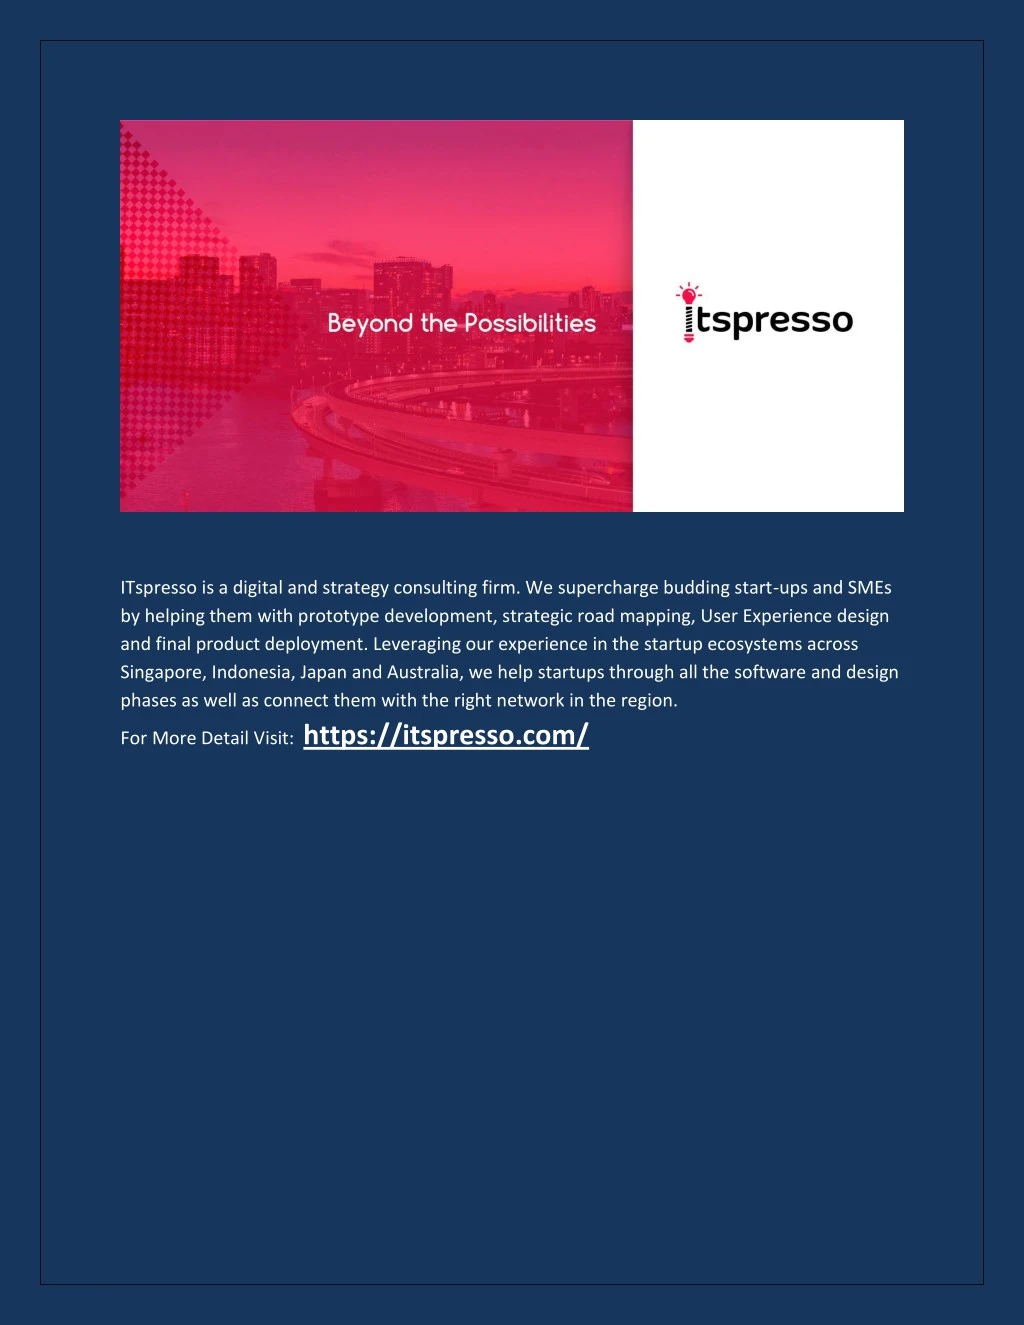 itspresso is a digital and strategy consulting